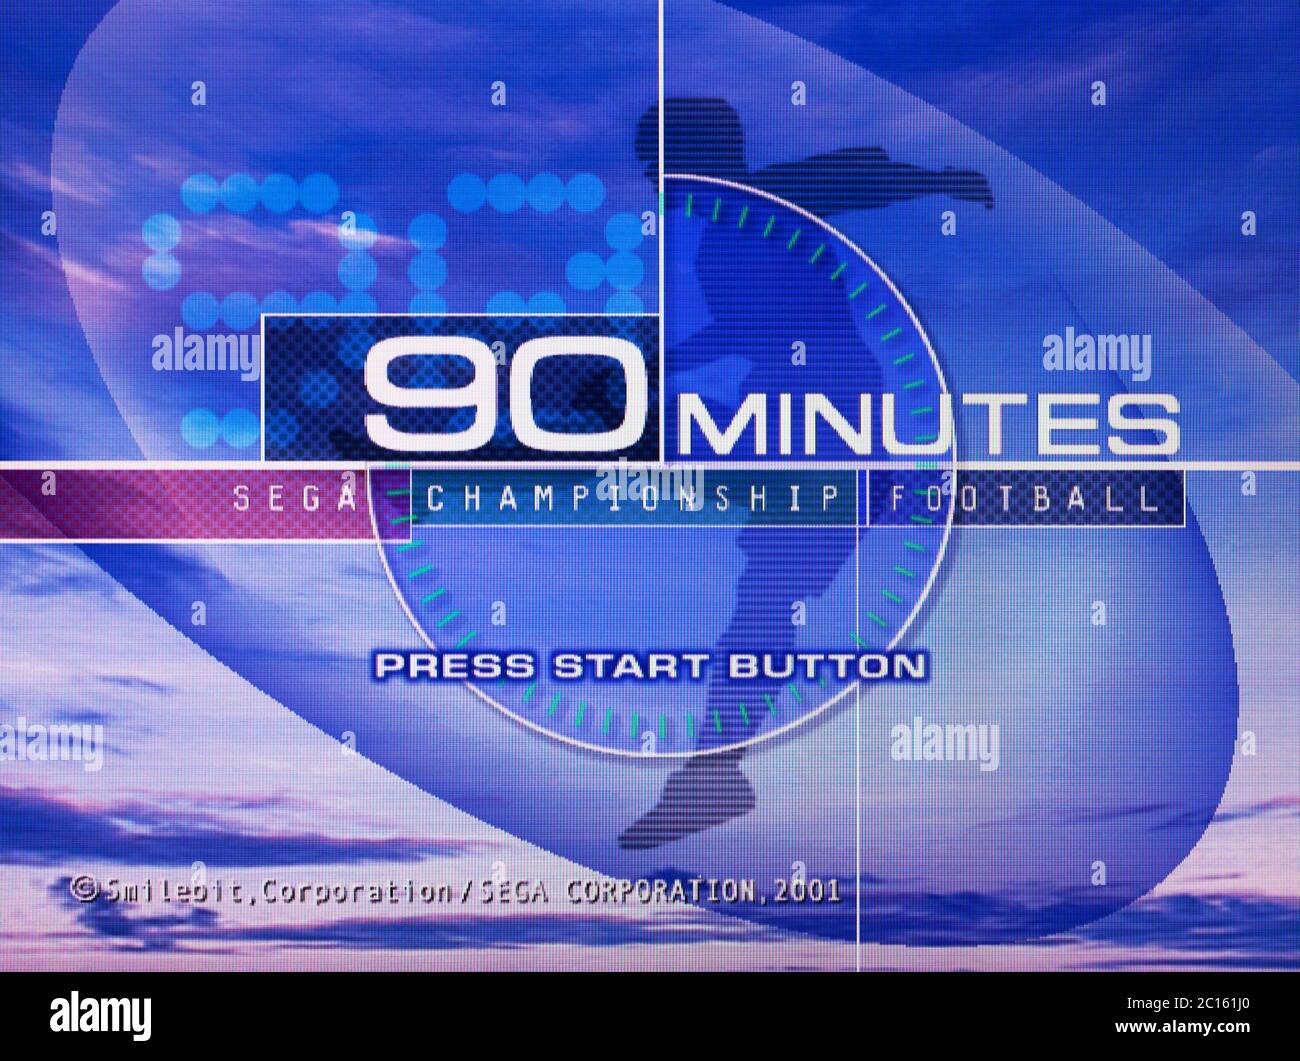 90 Minutes Championship Football - Sega Dreamcast Videogame - Editorial use only Stock Photo